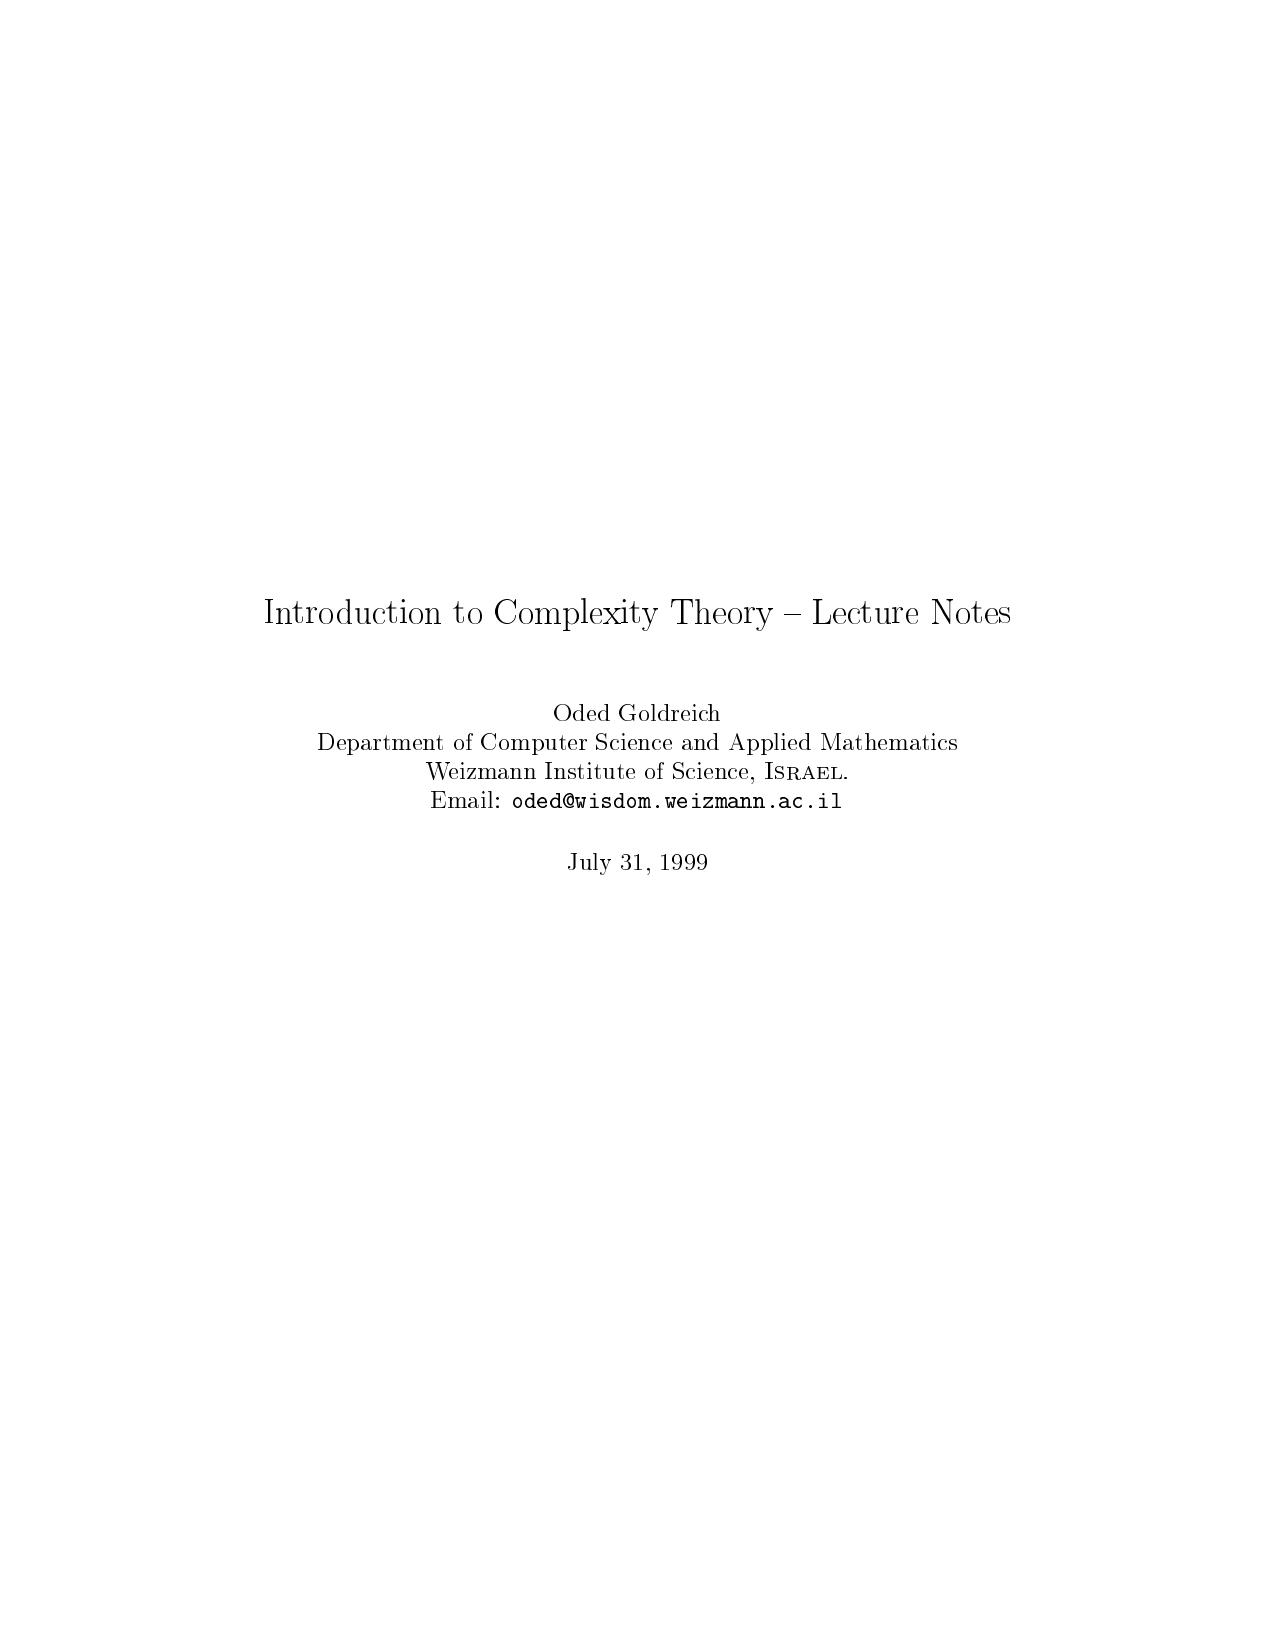 Introduction to Complexity Theory Lecture Notes